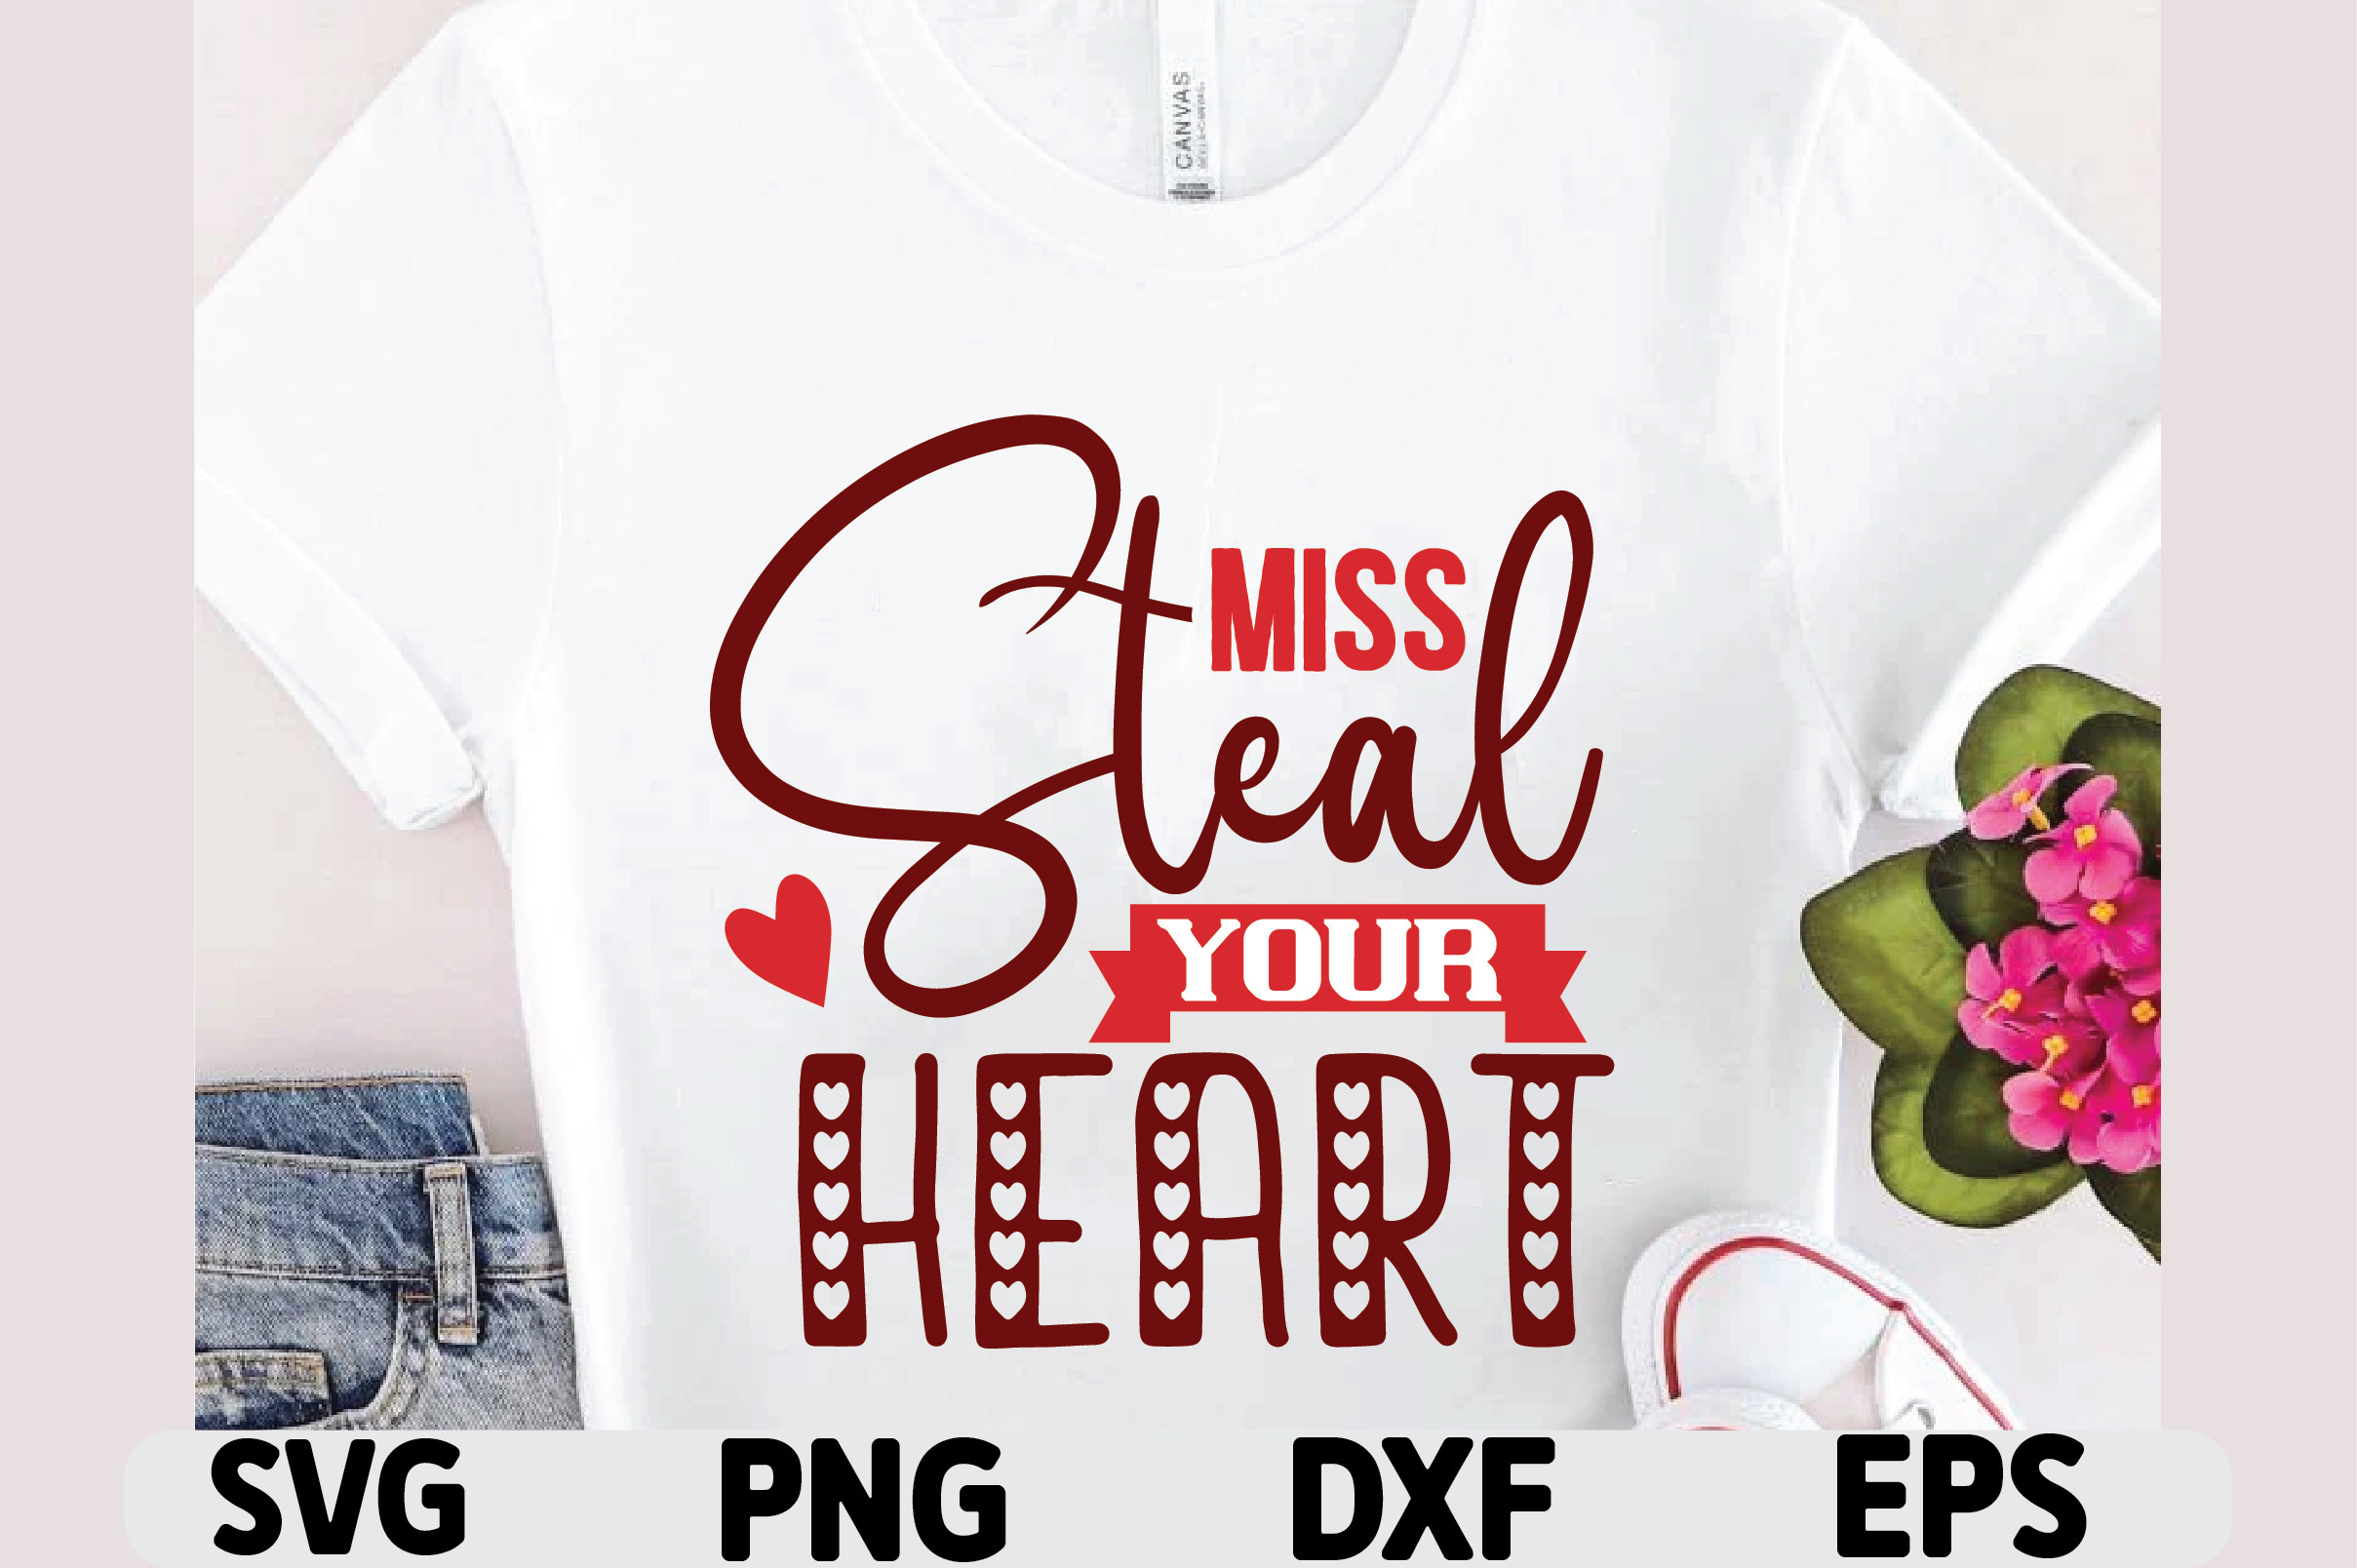 Miss Steal Your Heart Graphic by Graphics Home · Creative Fabrica